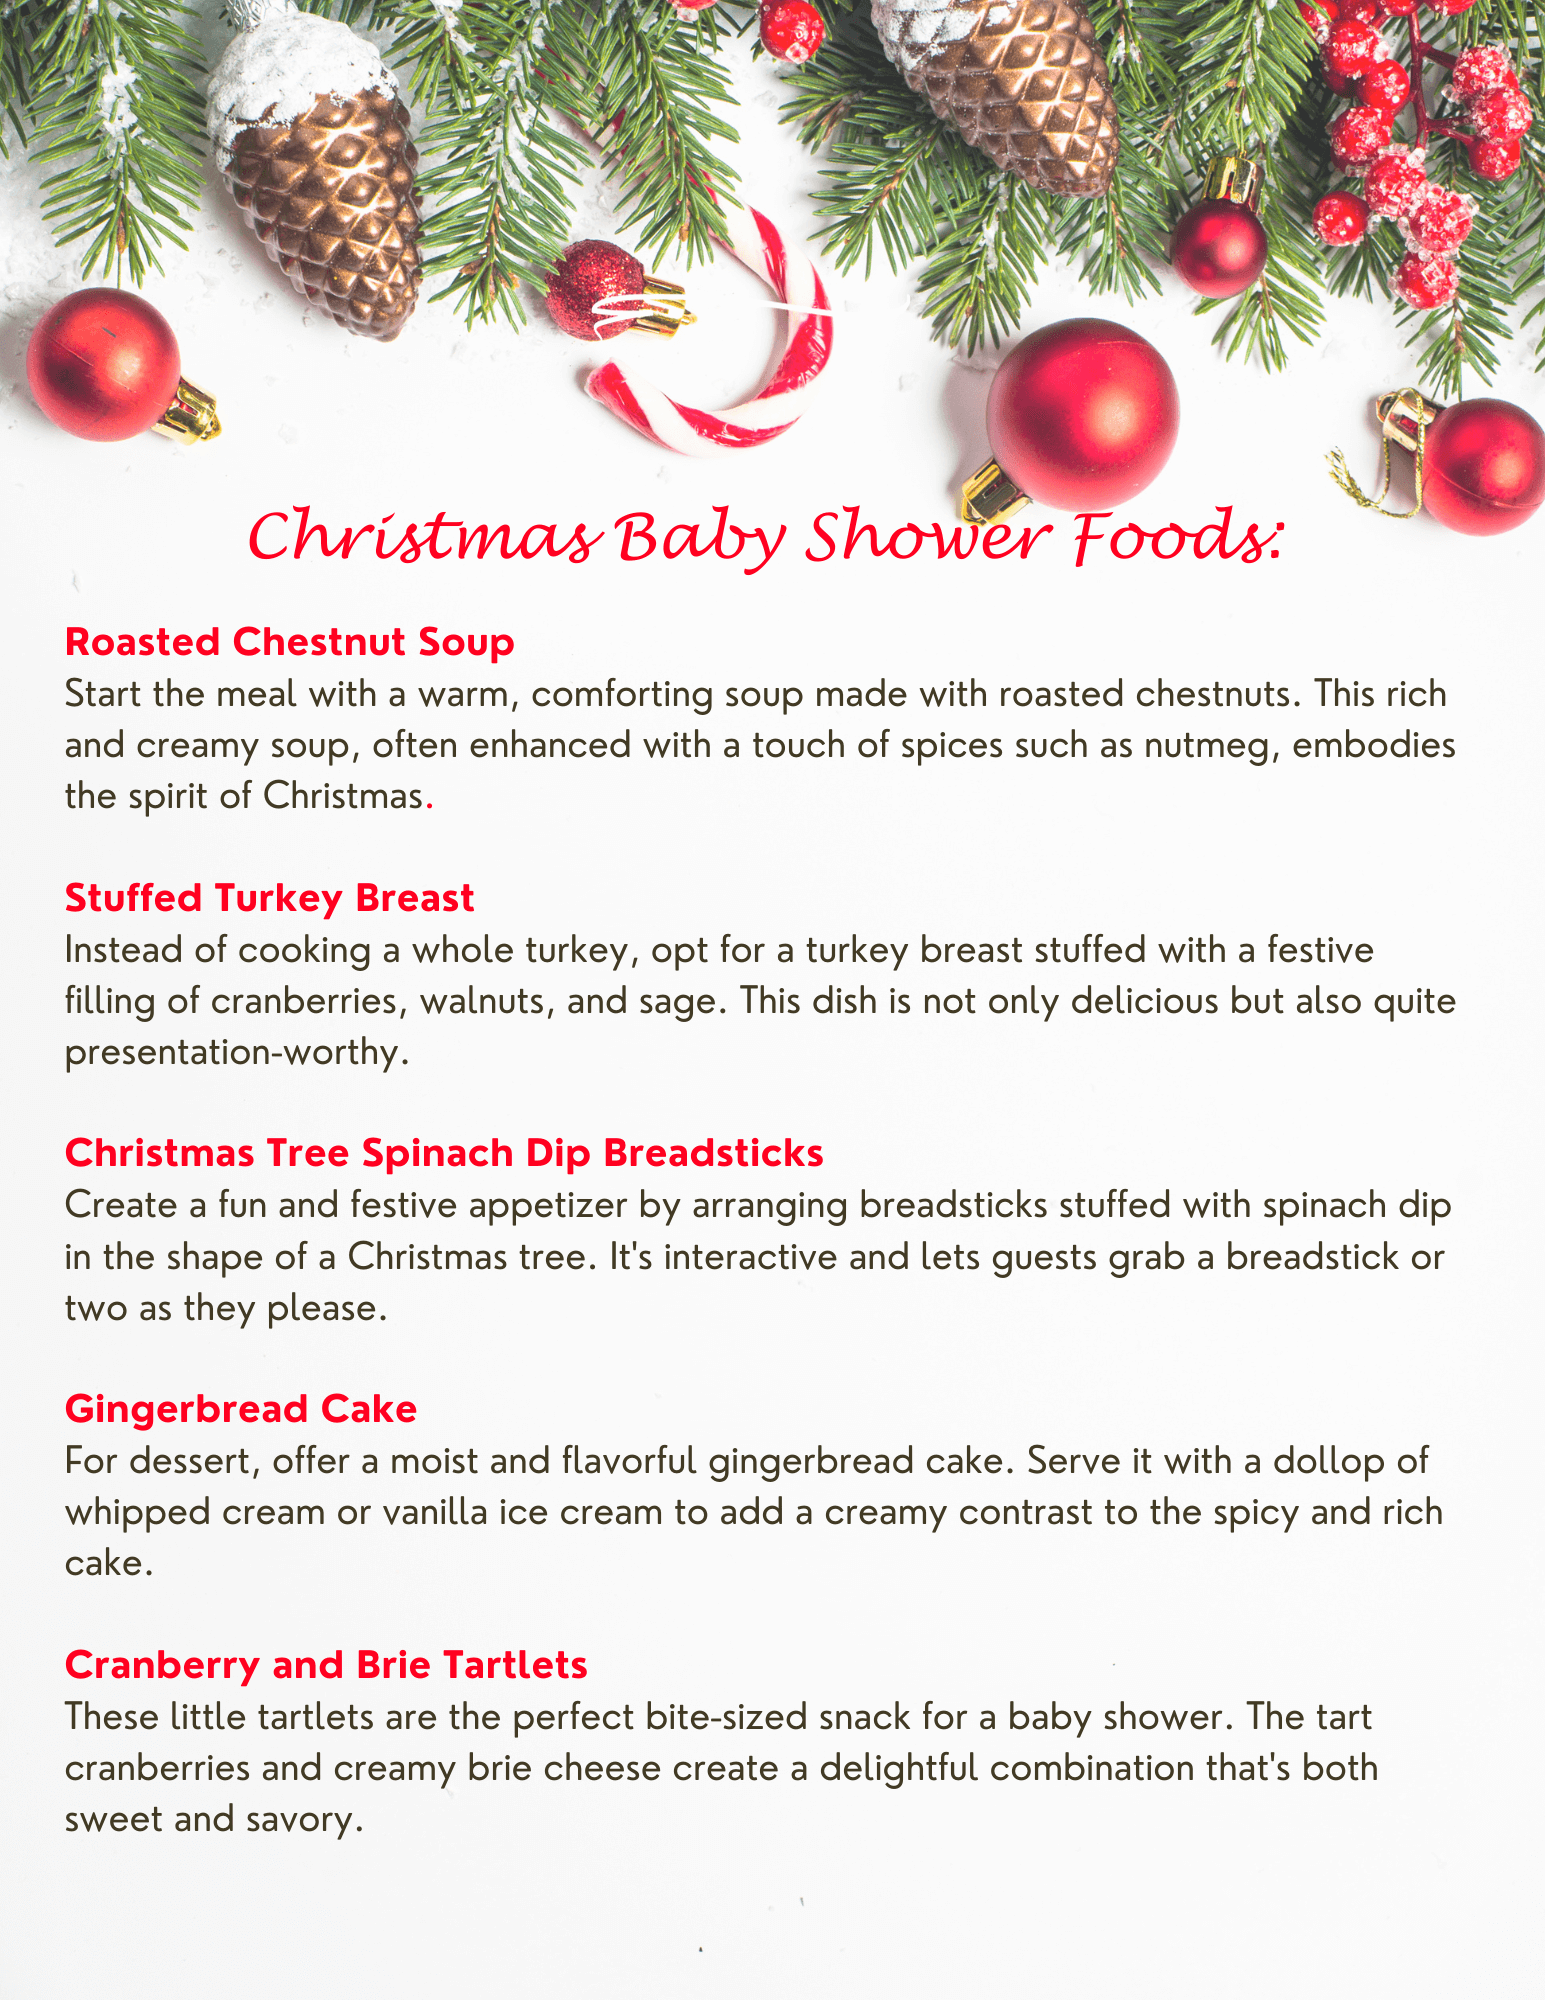 Christmas baby shower foods